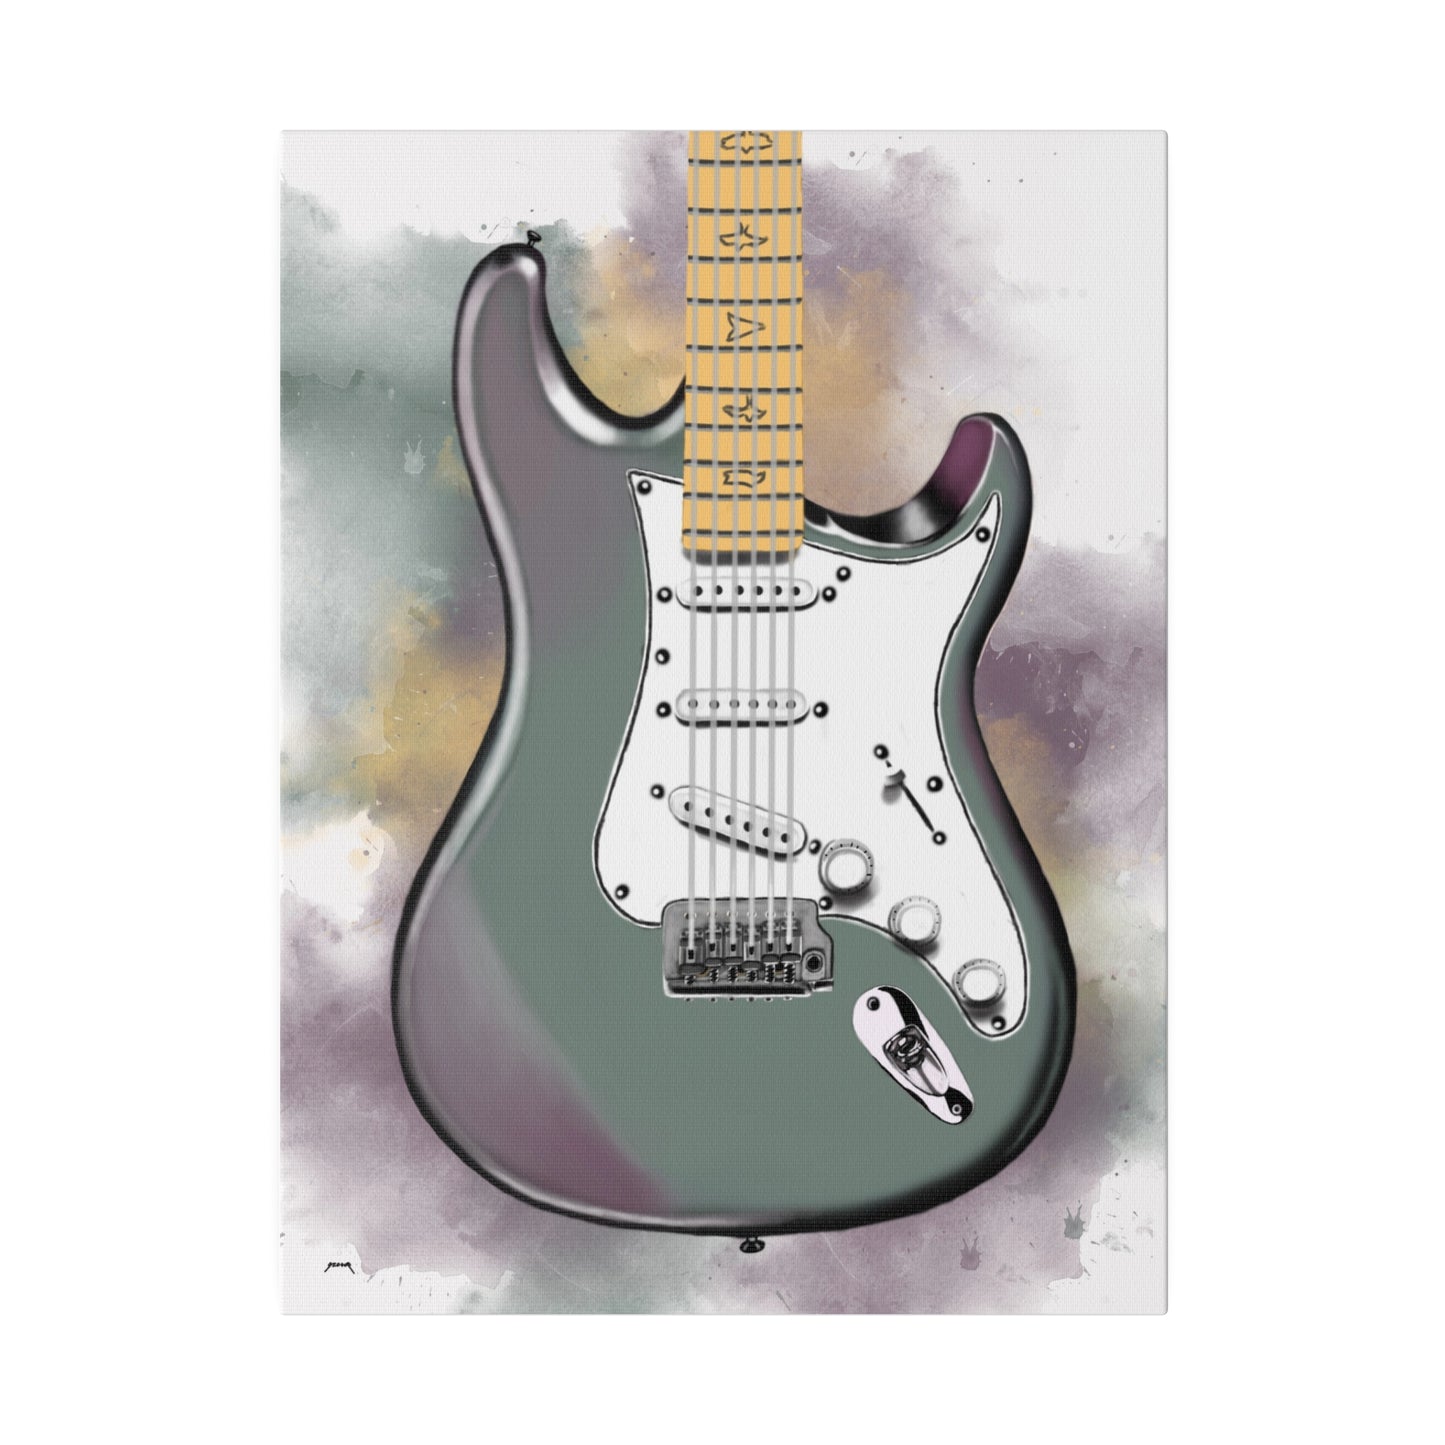 Digital painting of Ice electric guitar printed on canvas